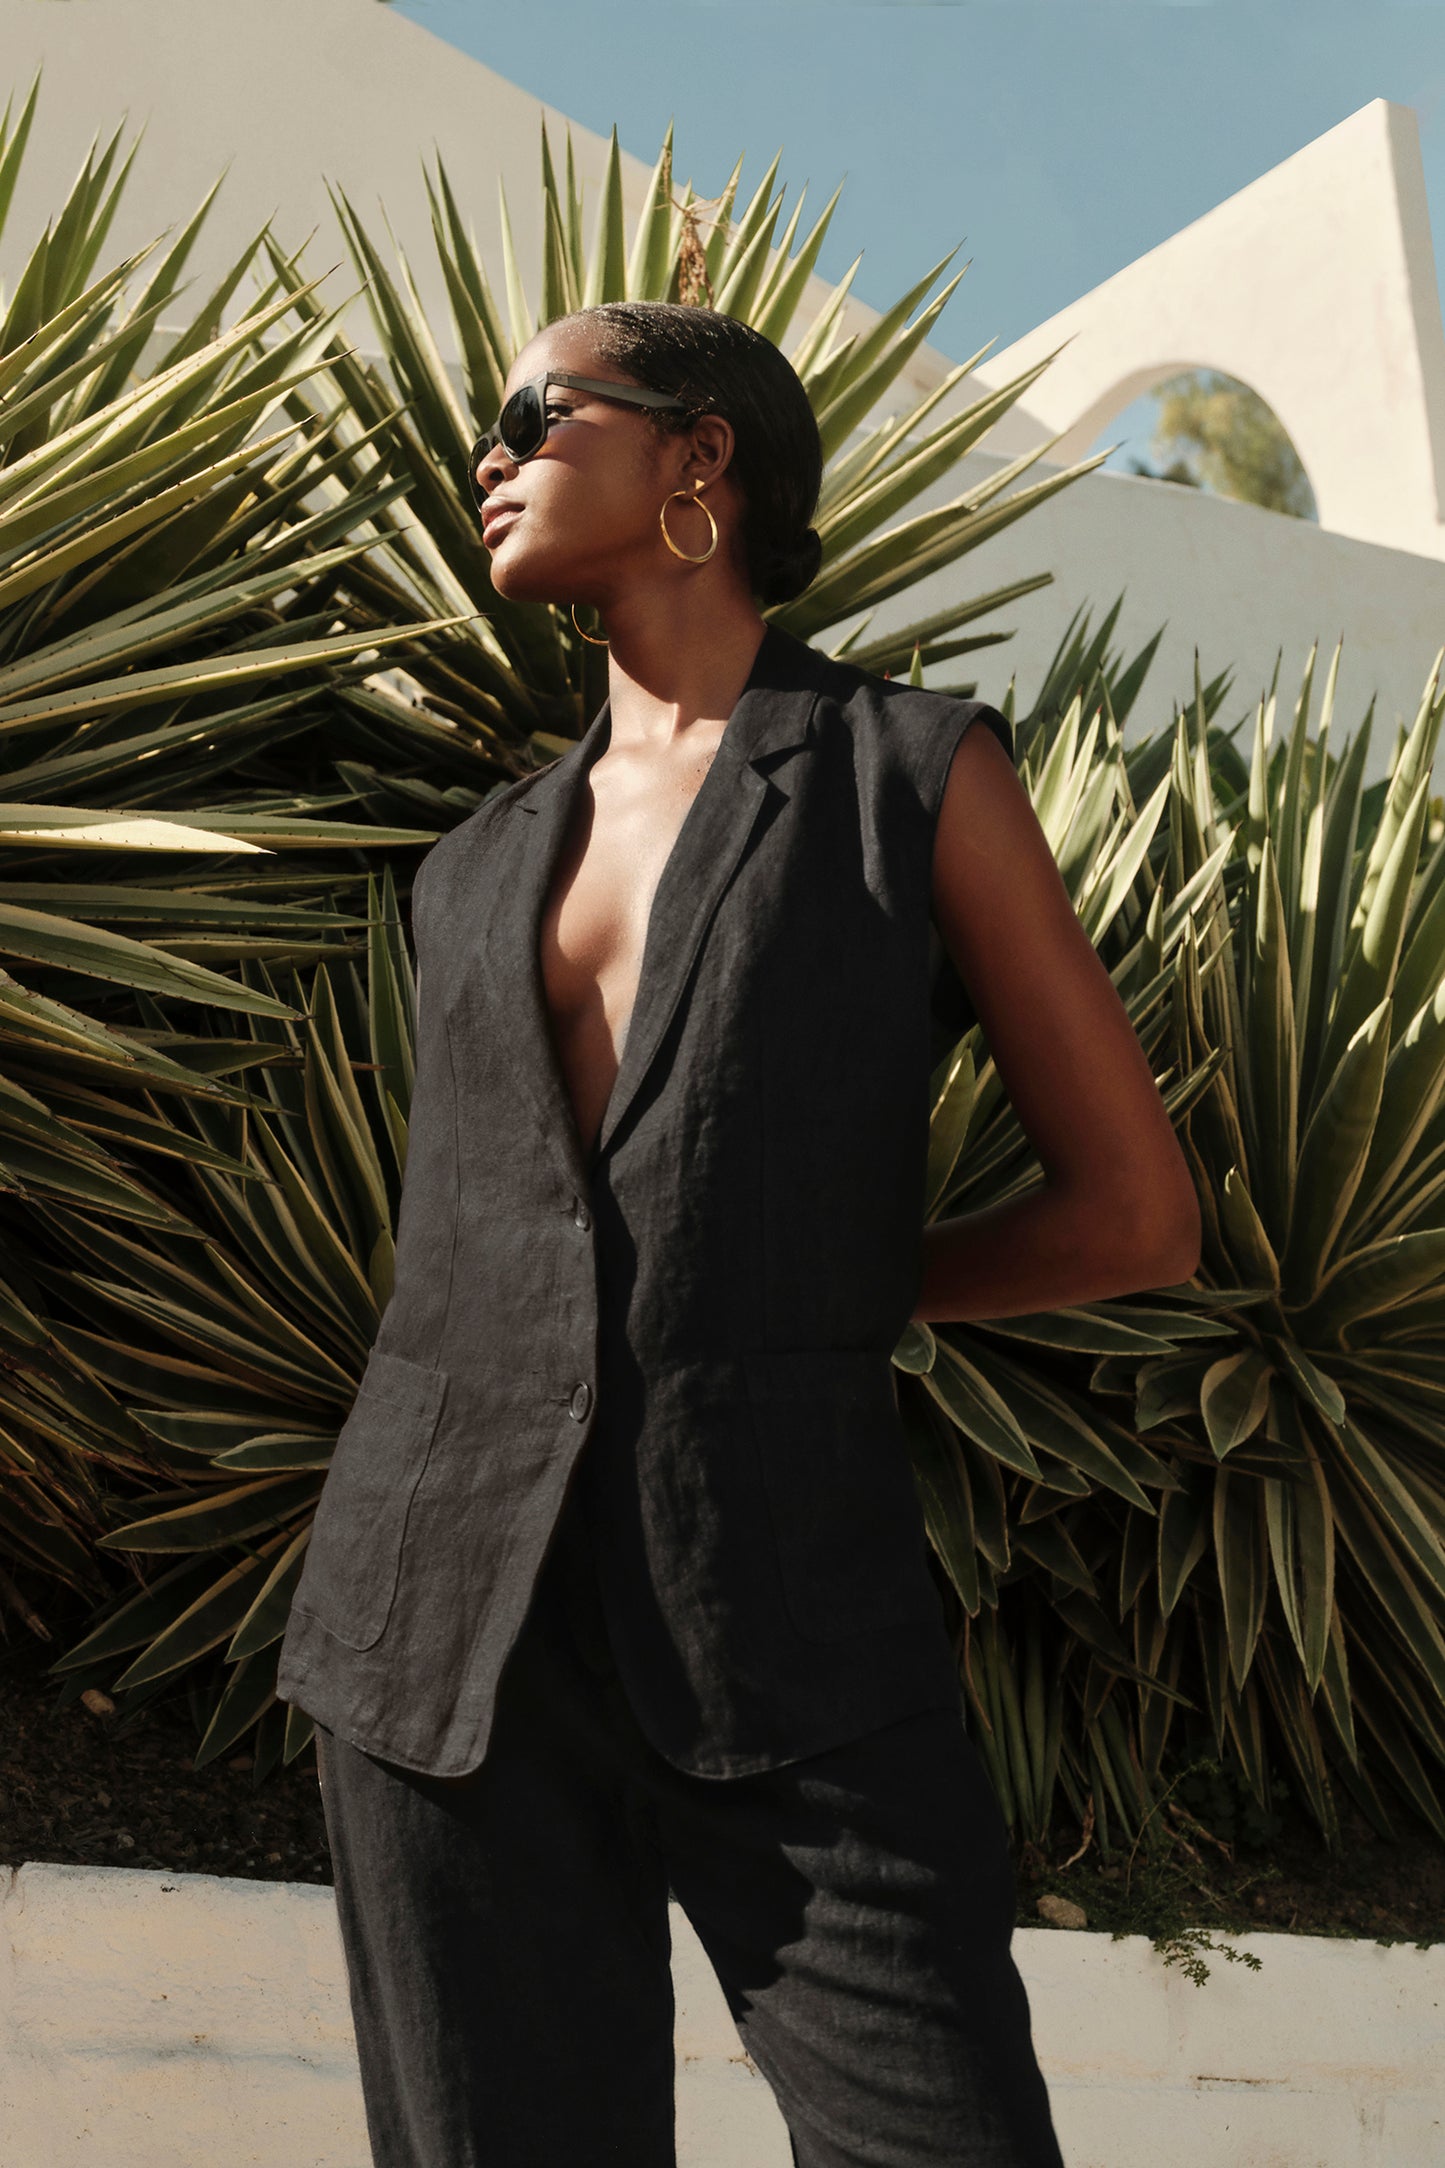 A stylish woman in a black BETHAN HEAVY LINEN SLEEVELESS BLAZER by Velvet by Graham & Spencer stands confidently against a background of sharp green leaves, wearing sunglasses and hoop earrings.-36691393413313